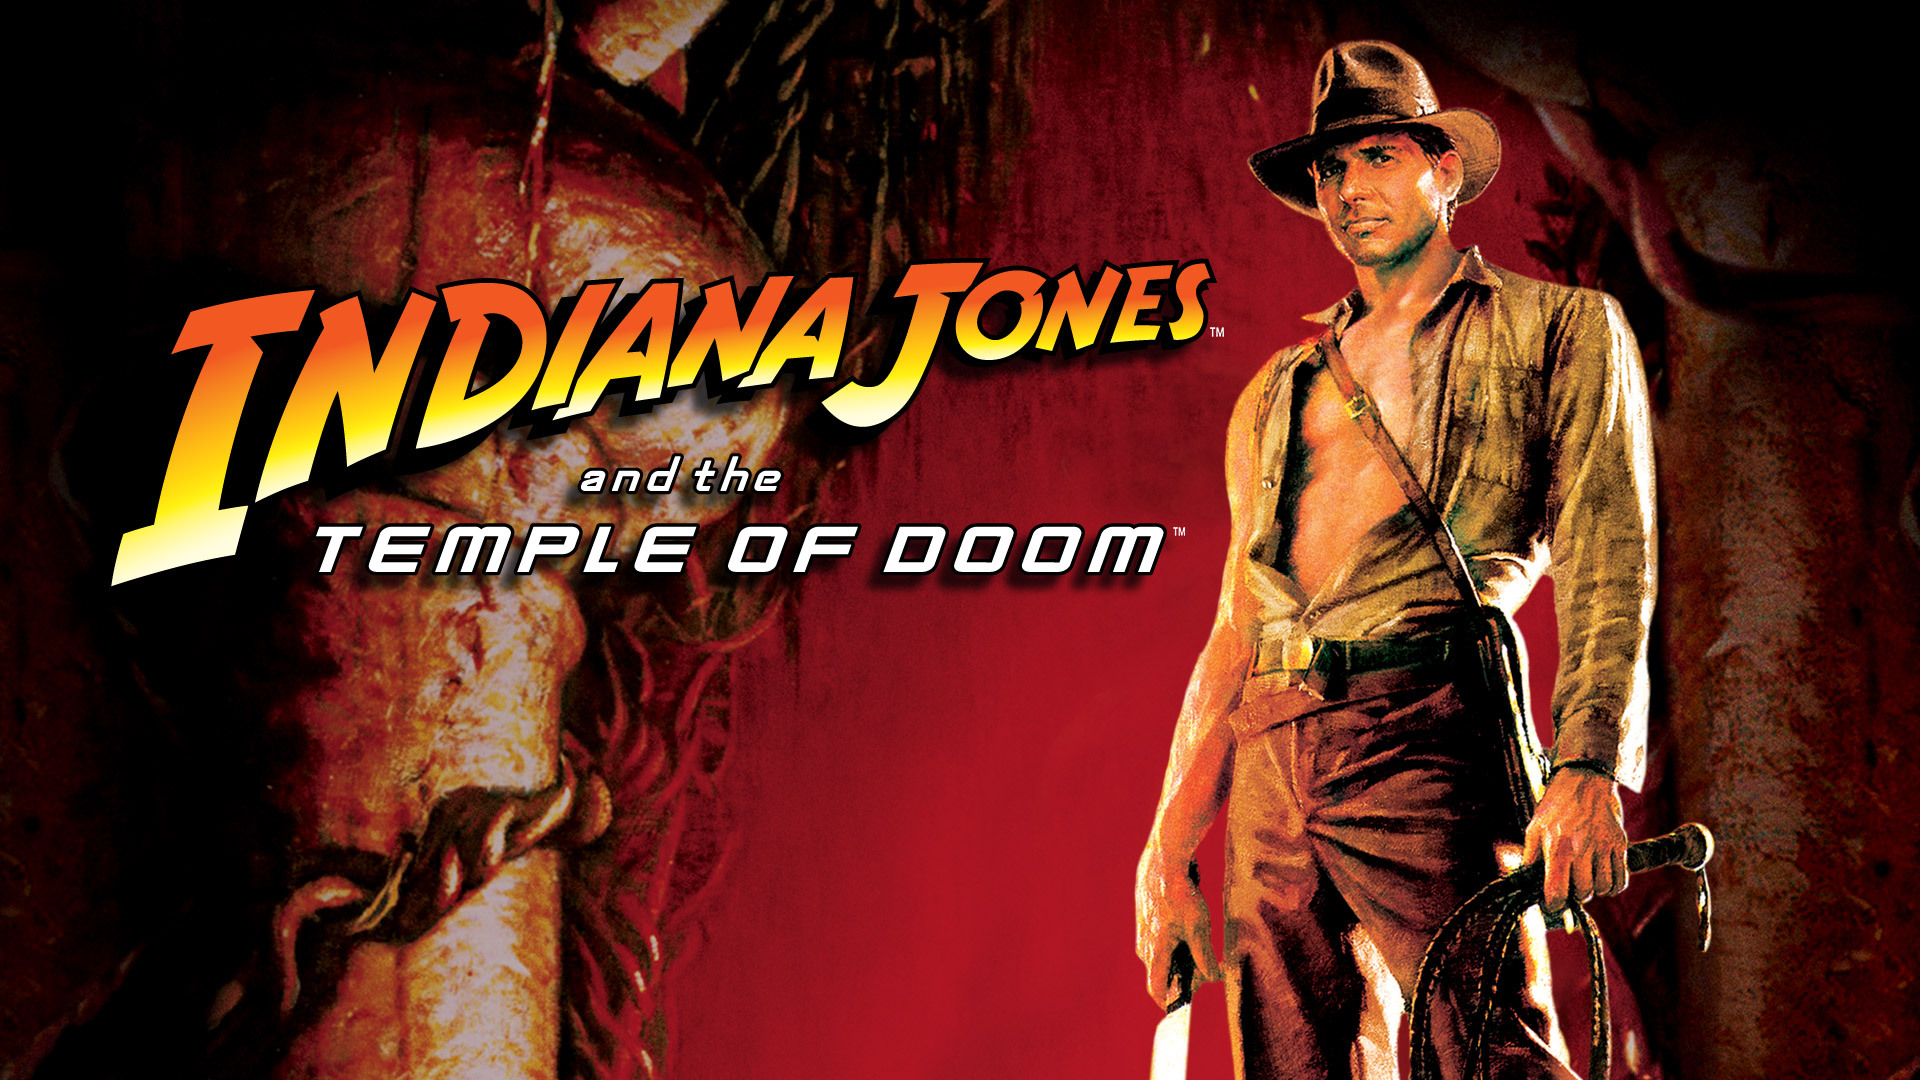 35-facts-about-the-movie-indiana-jones-and-the-temple-of-doom